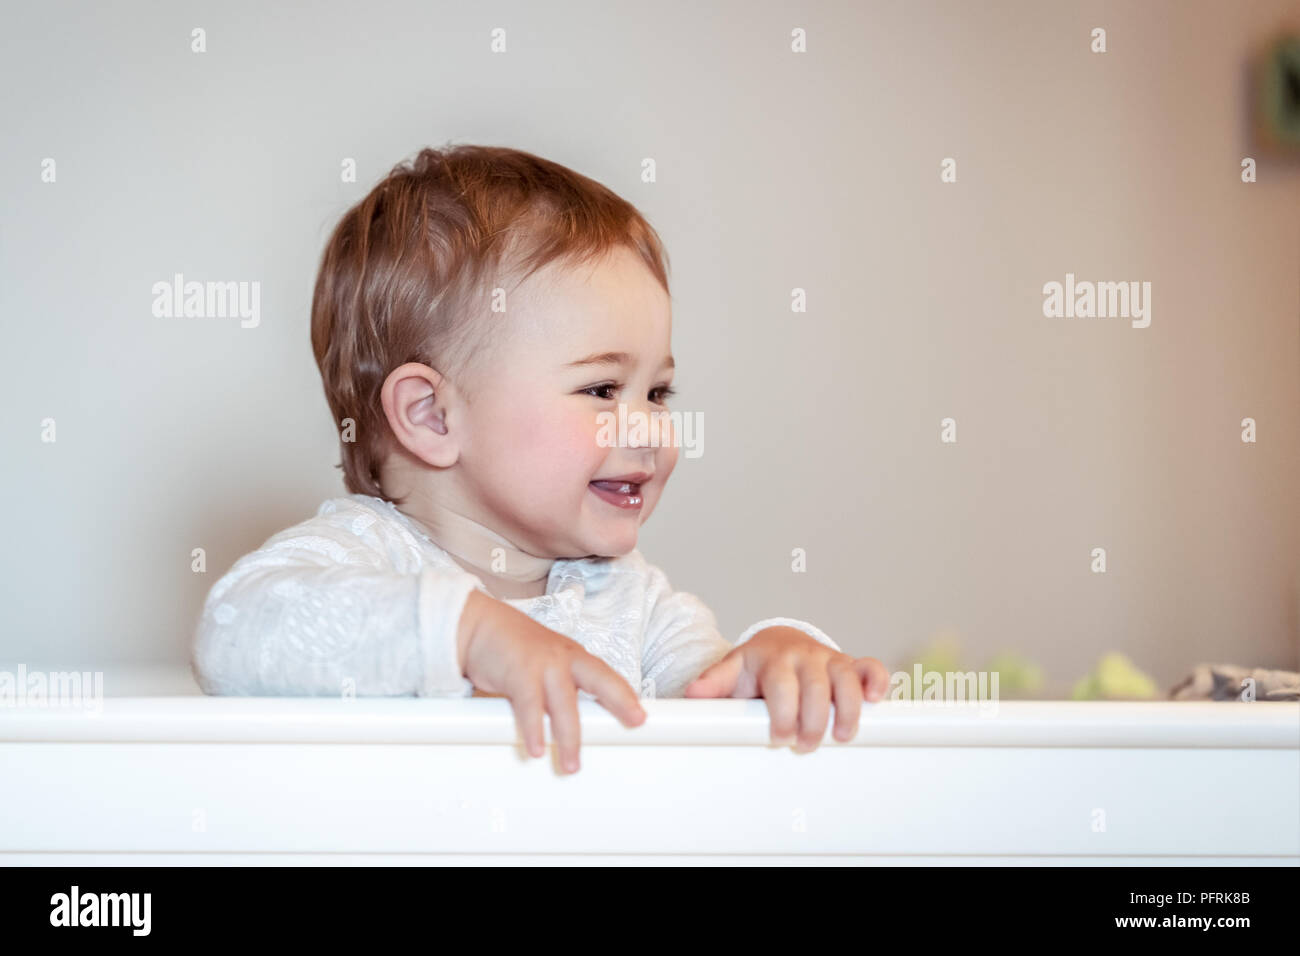 Portrait of a cute little baby boy at home standing in the crib, sweet child having fun in his bedroom, happy healthy childhood Stock Photo